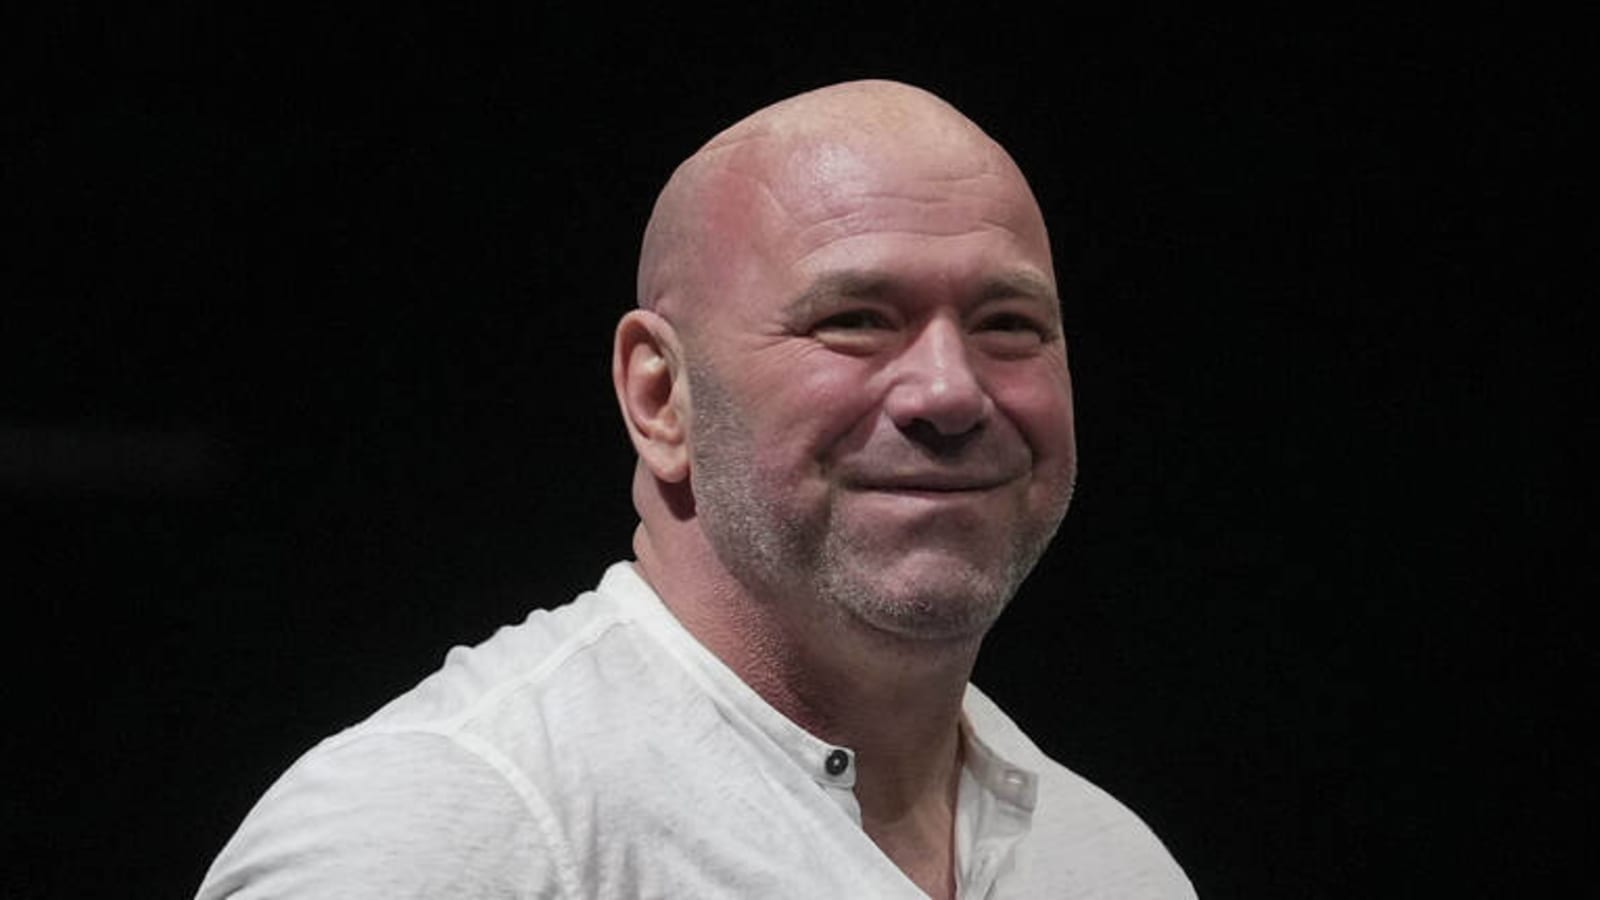 Dana White's Power Slap League to be licensed athletic competition in Nevada